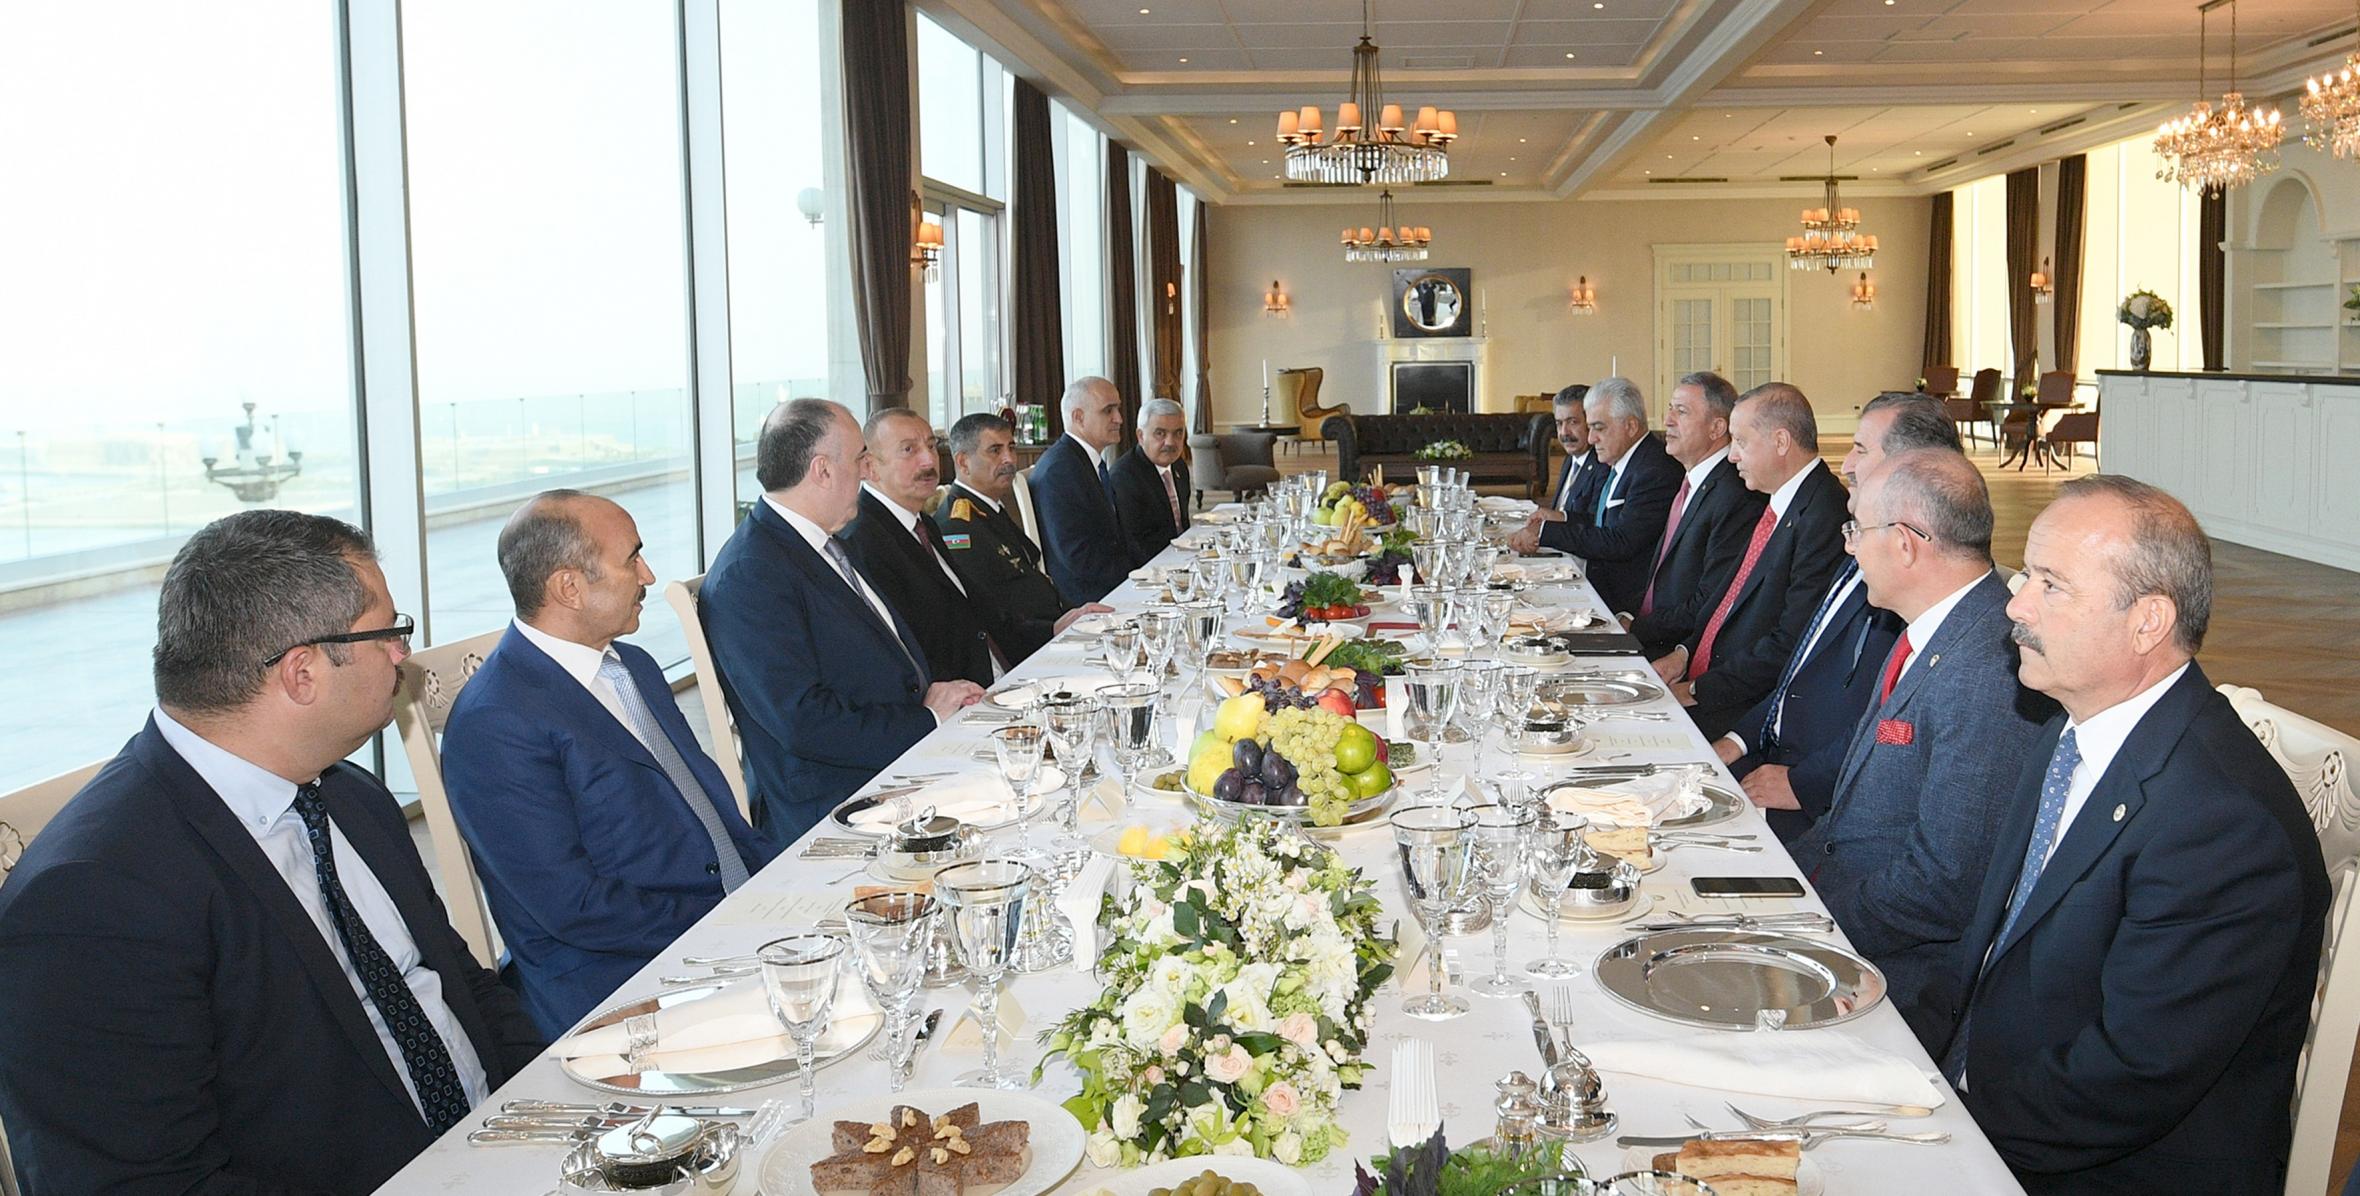 Presidents of Azerbaijan and Turkey had joint working dinner